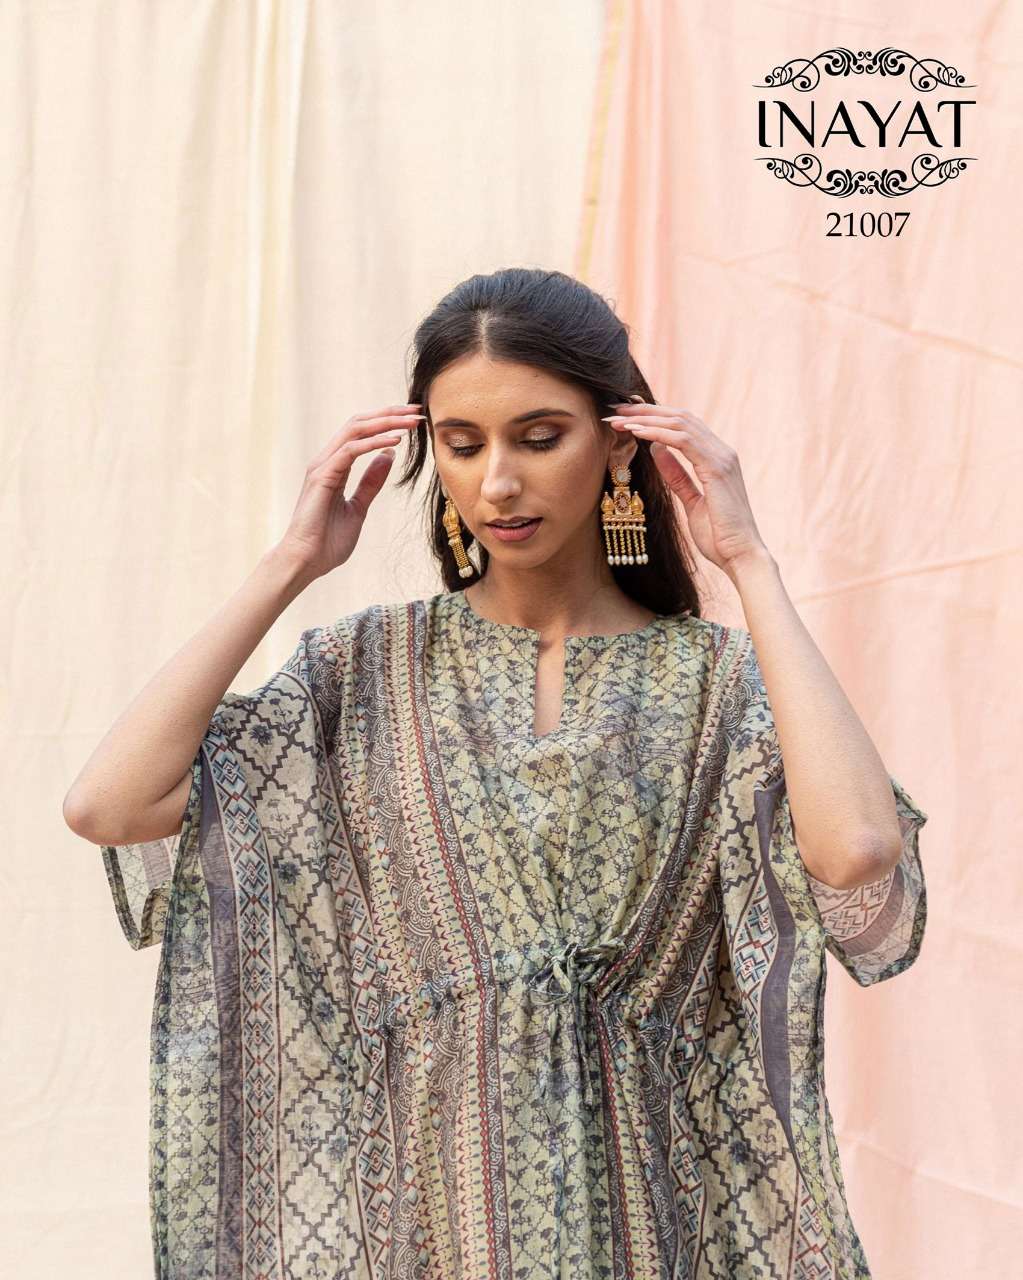 INAYAT BY ASLIWHOLESALE 21001 TO 21007 SERIES SOFT SILK KAFTANS